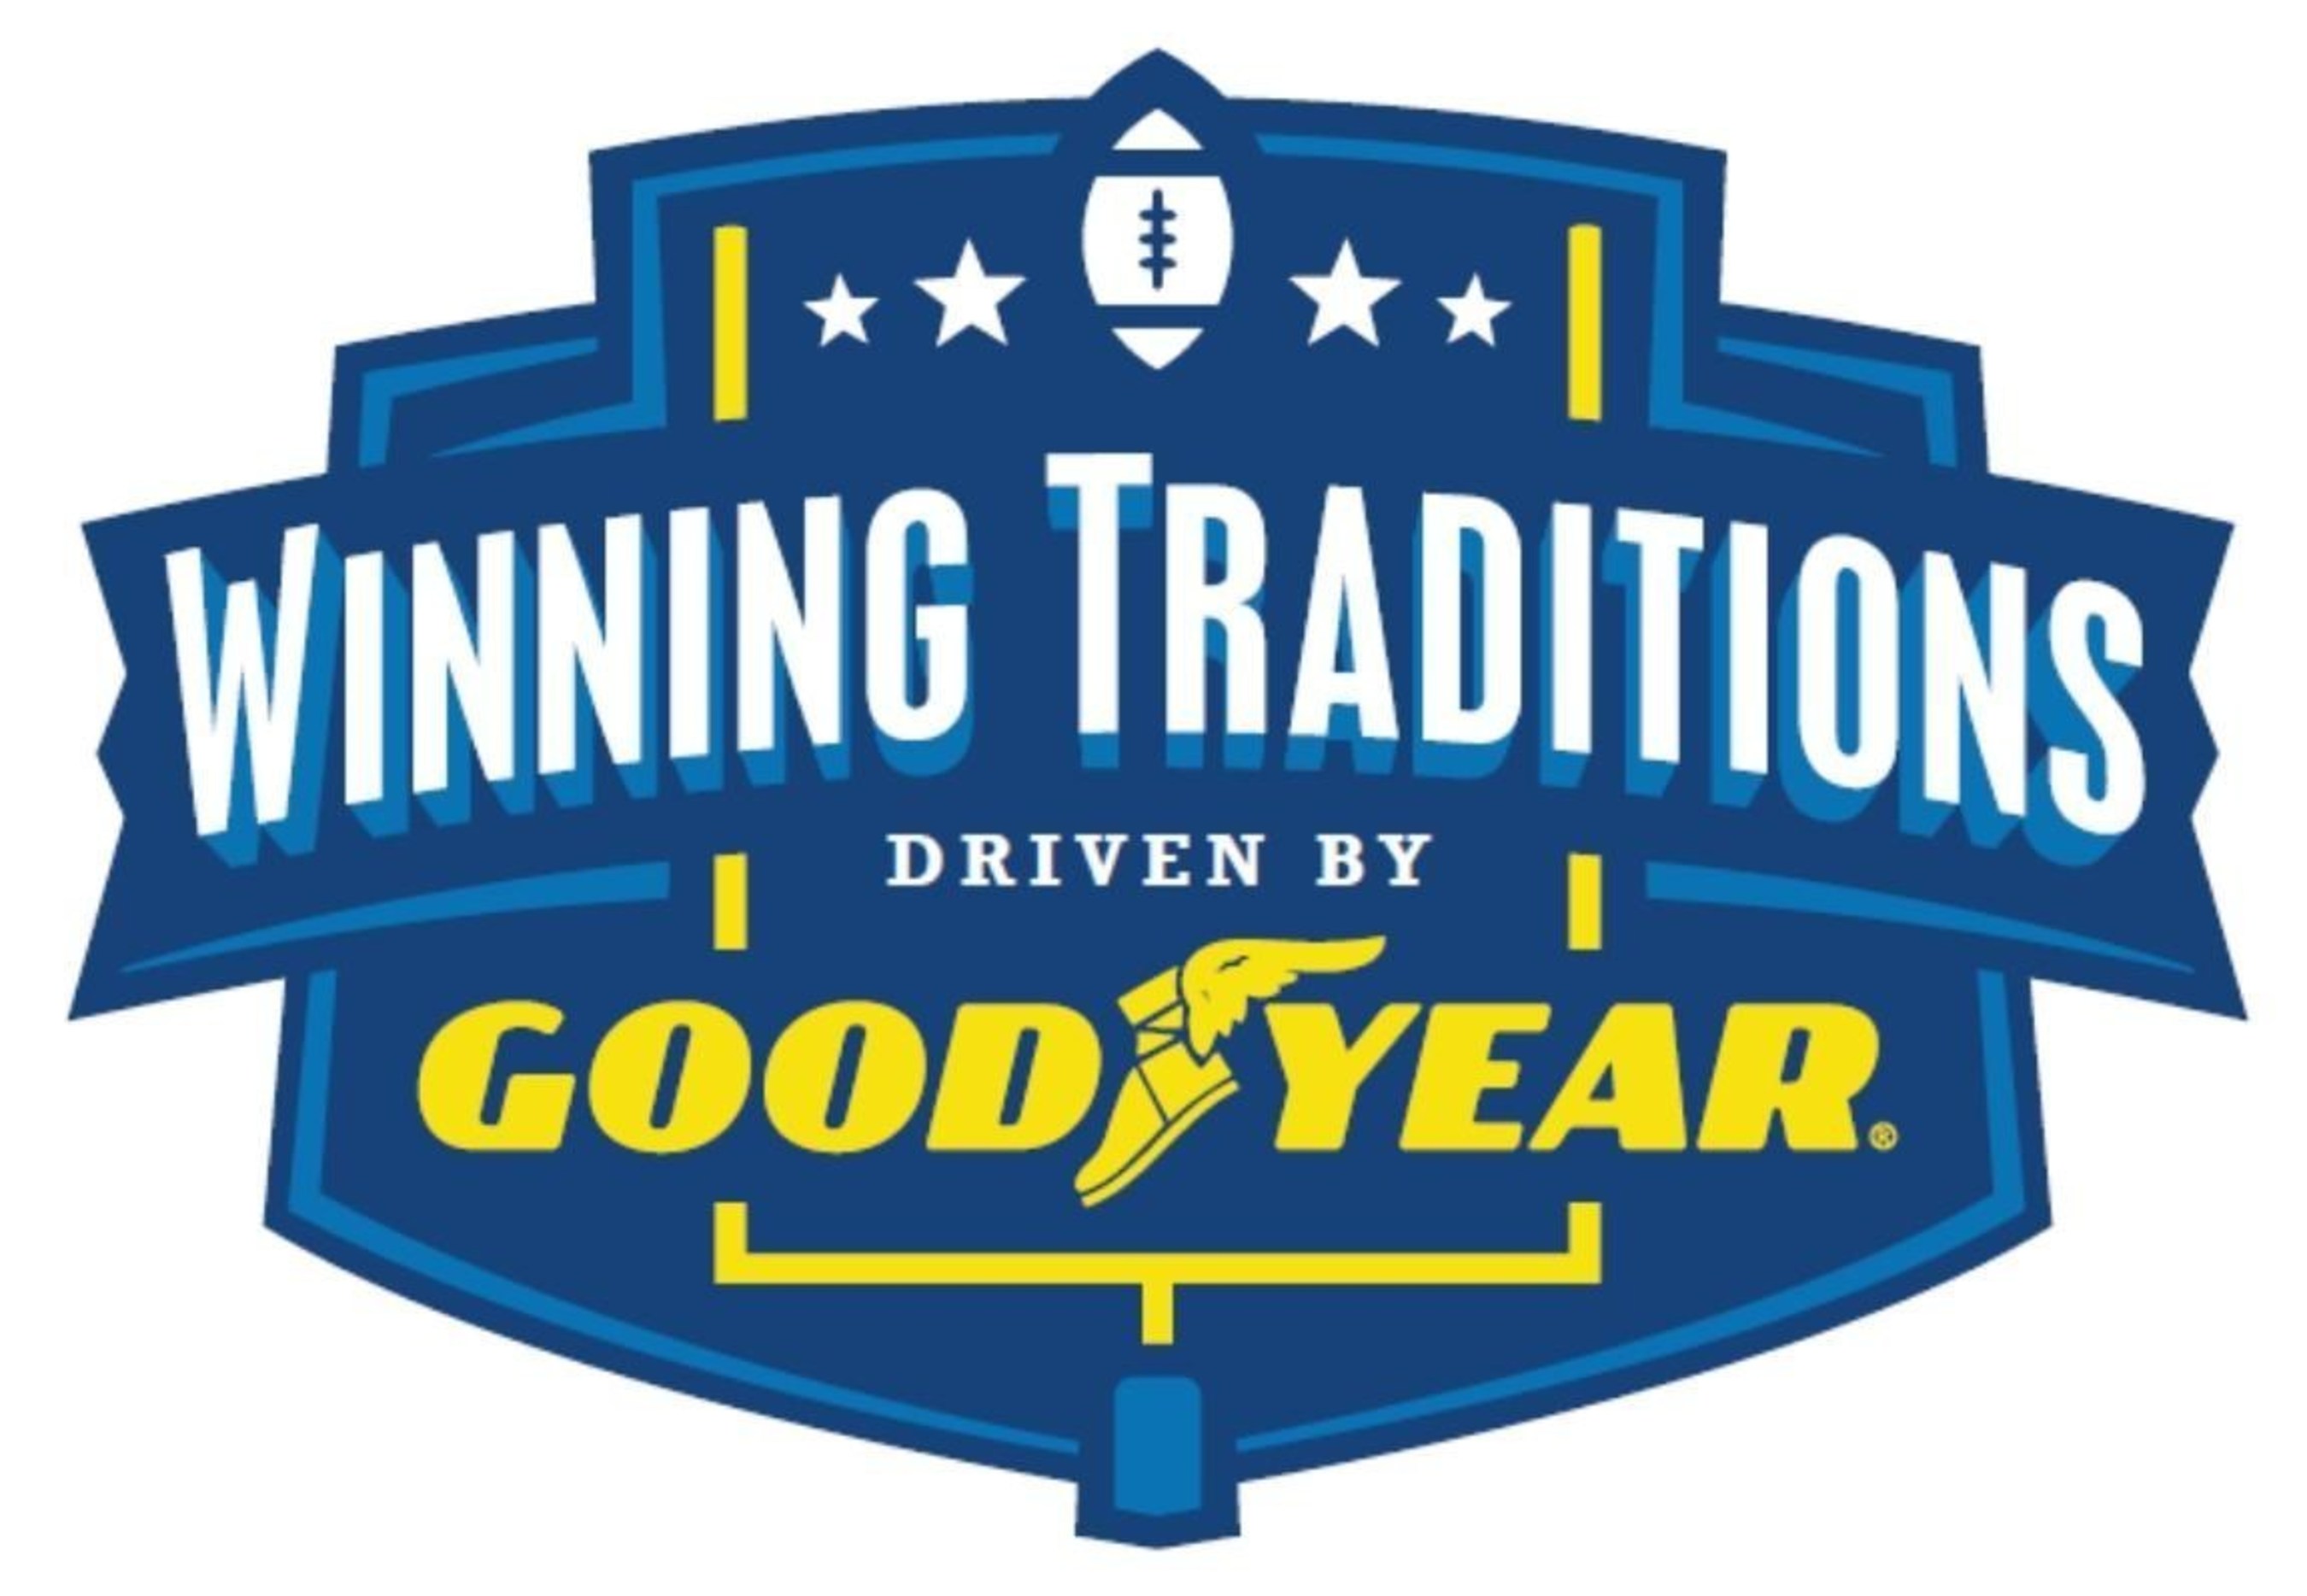 Starting October 15, fans can head to www.ESPN.com/Goodyear to cast their ballot in the "Winning Traditions Driven by Goodyear(R)" fan vote, selecting their favorite from a number of recognized traditions in college football.